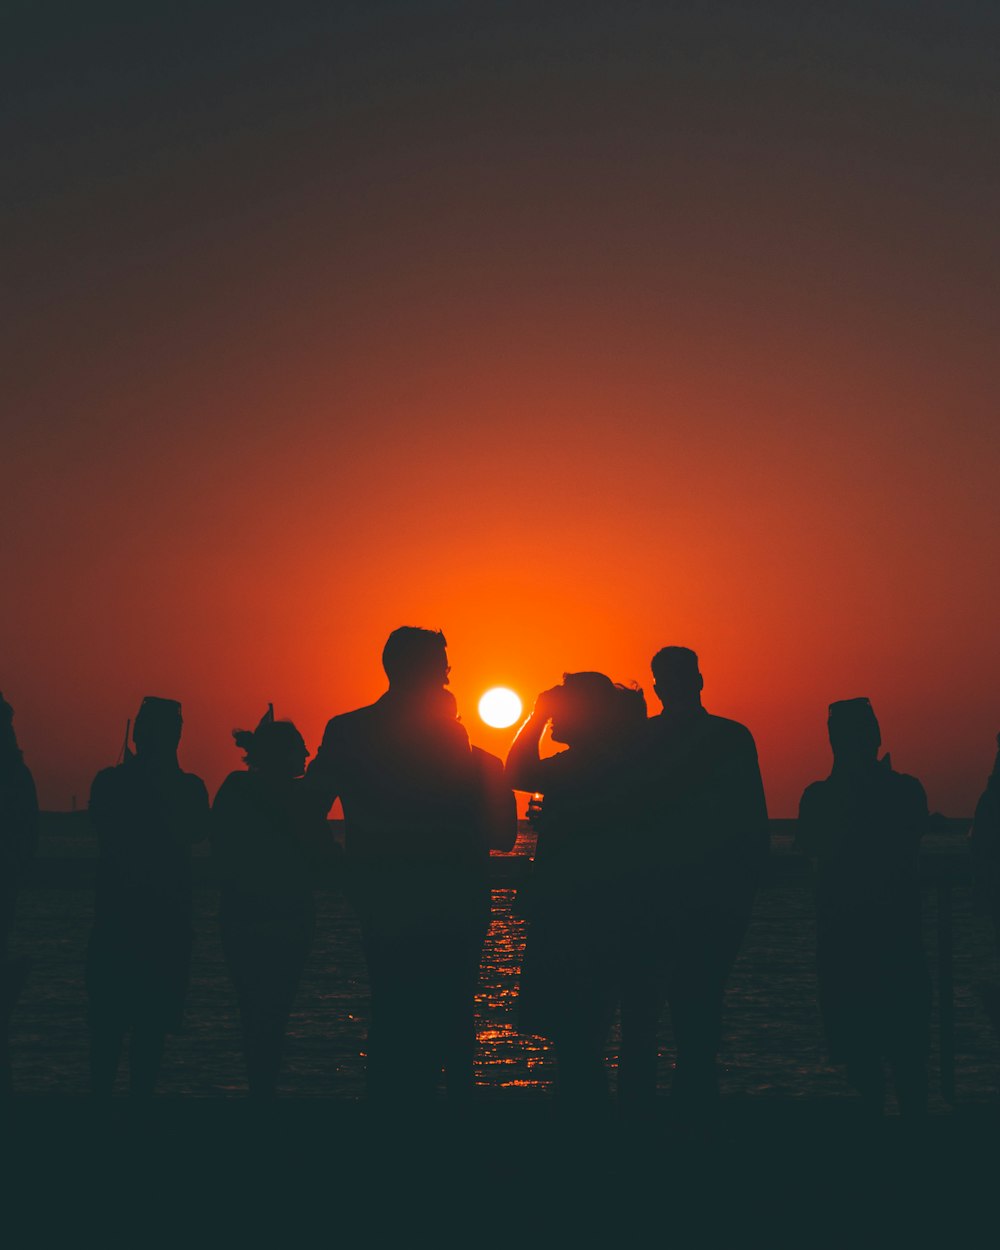 silhouette of people standing on beach during sunset